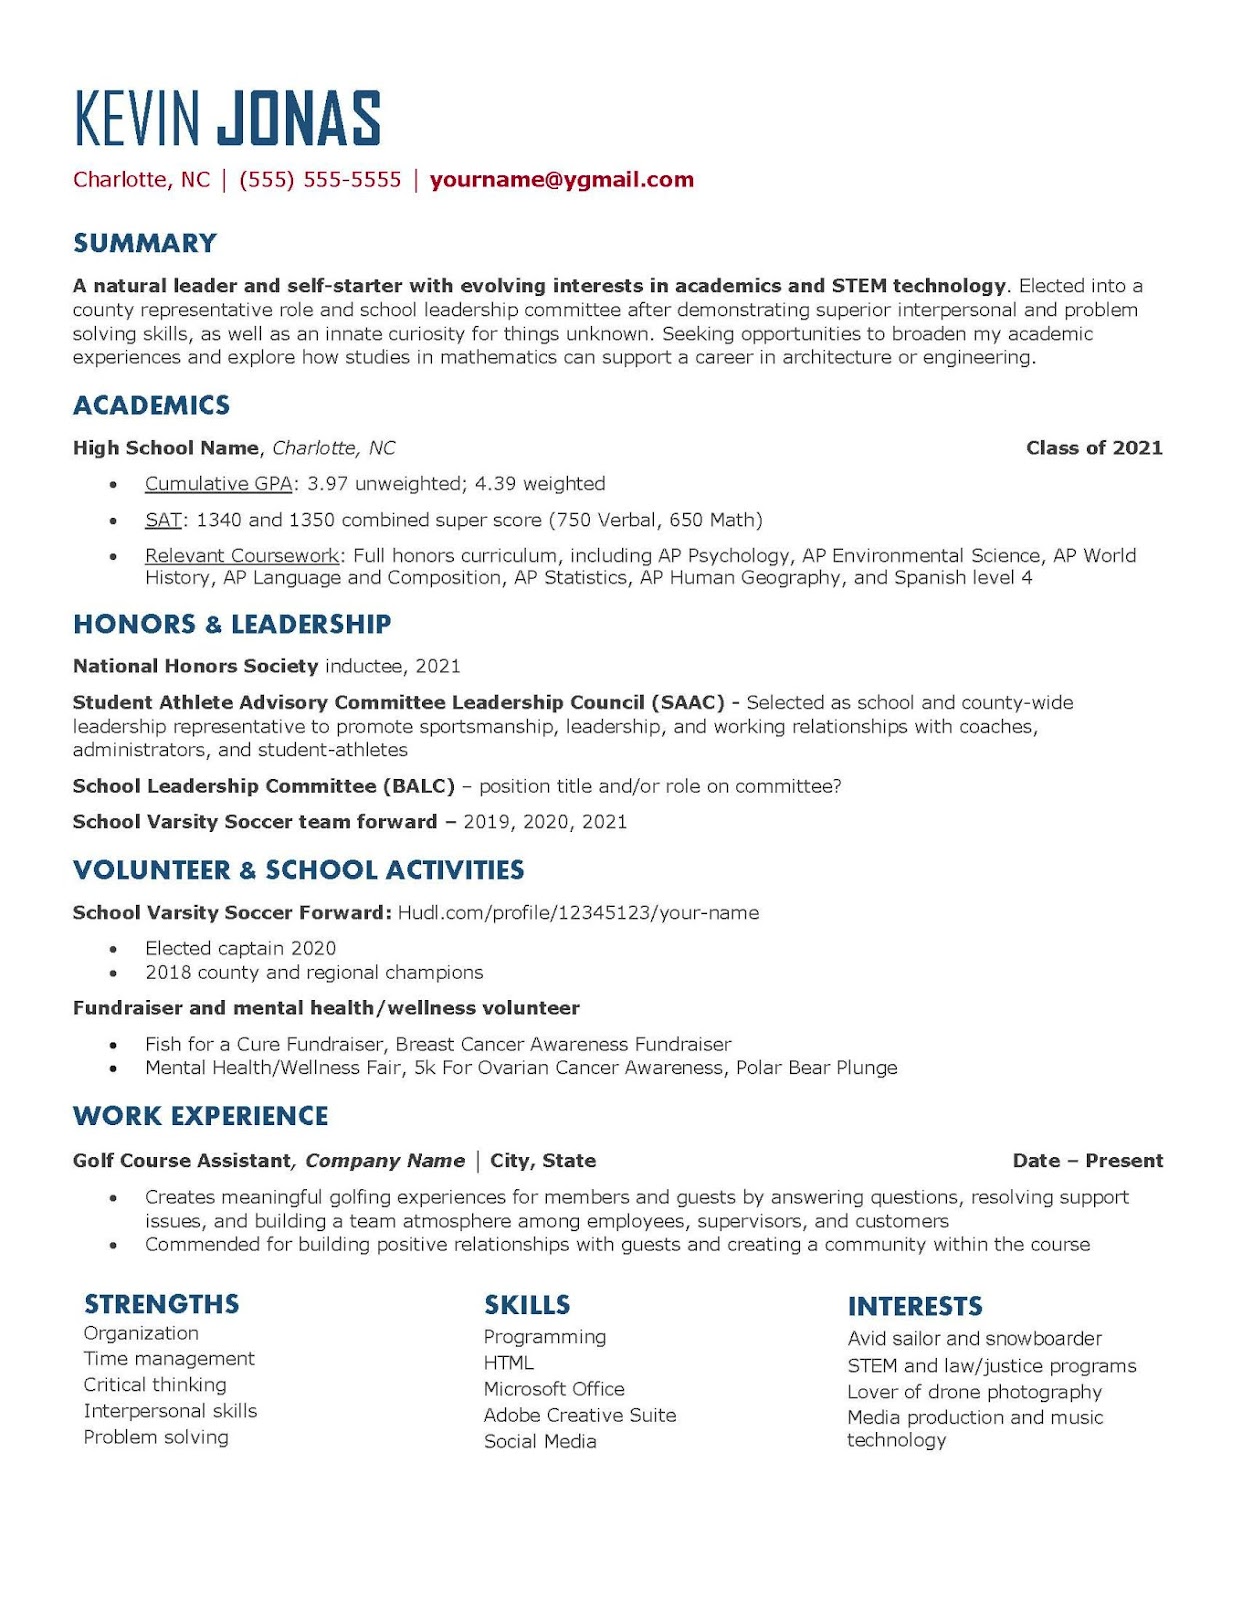 Full teen resume example and template